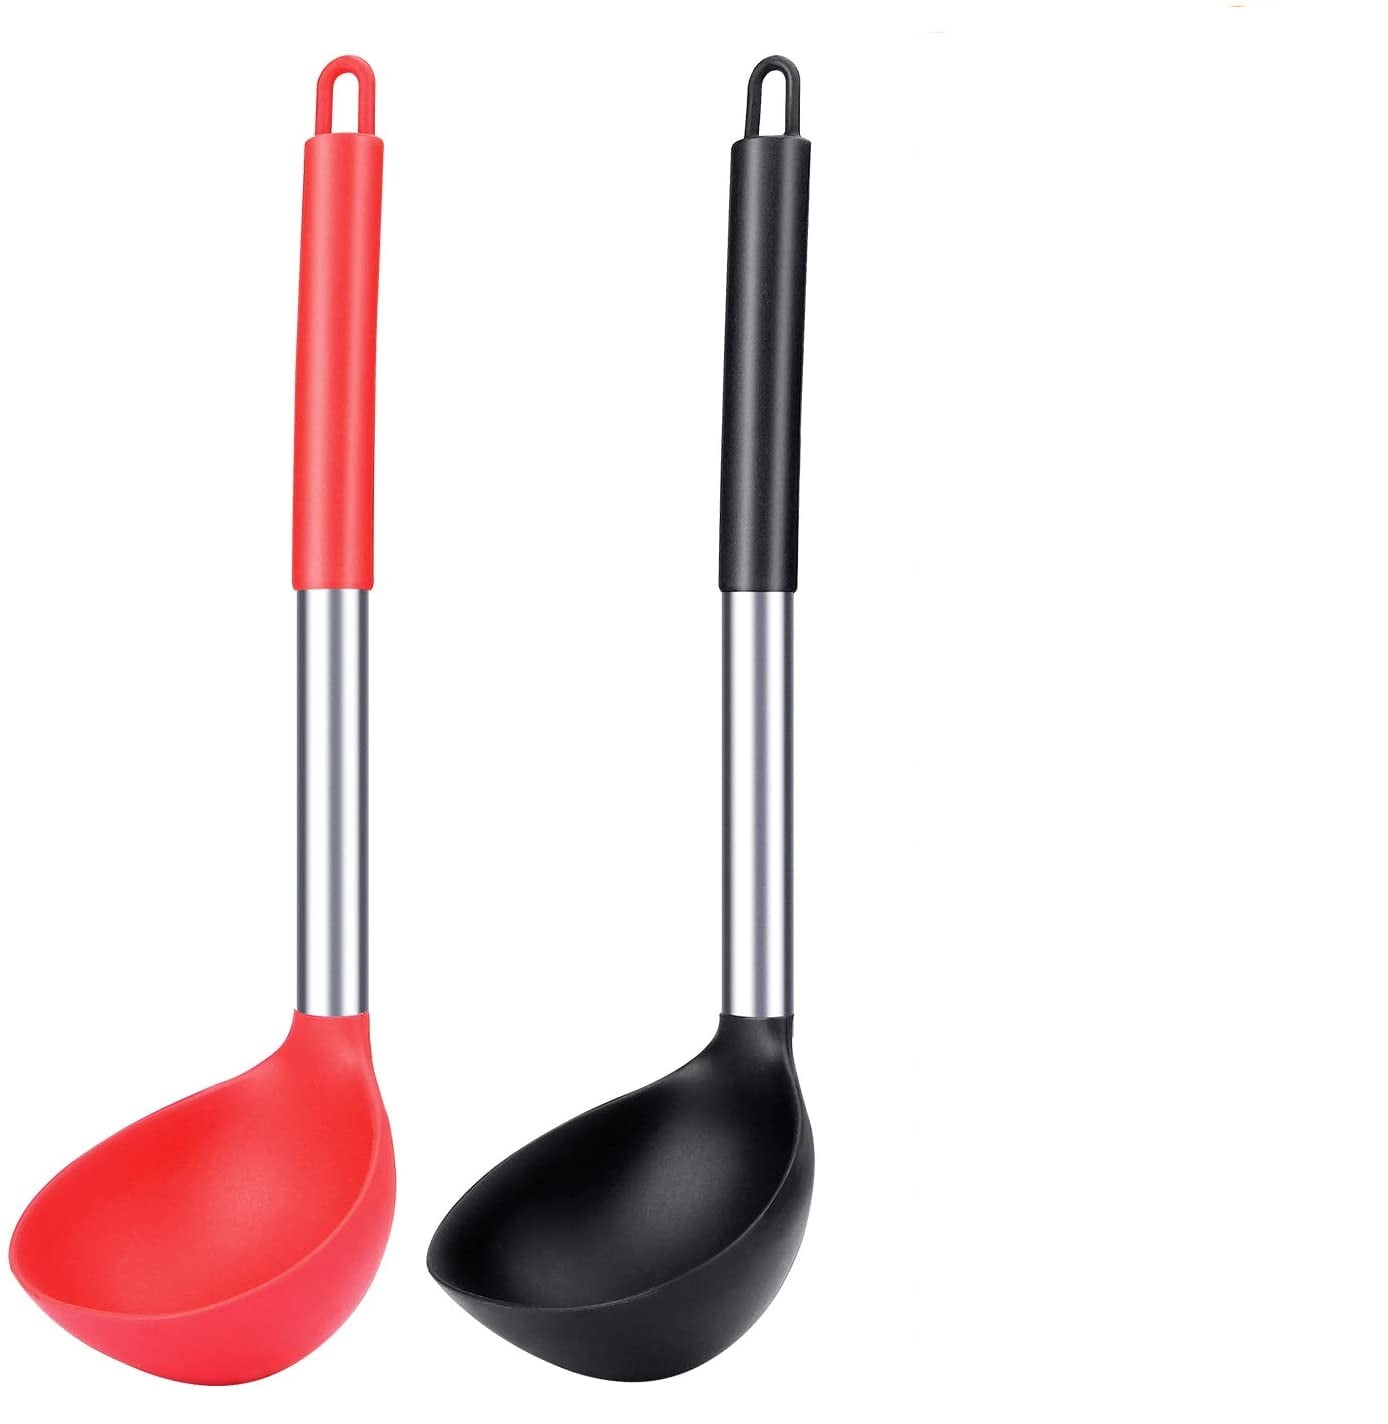 3 Pcs Silicone Spoon Red,Blue,Black Nonstick Kitchen Spoon Heat-Resistant Cooking Spoons for Stirring Scooping and Mixing 